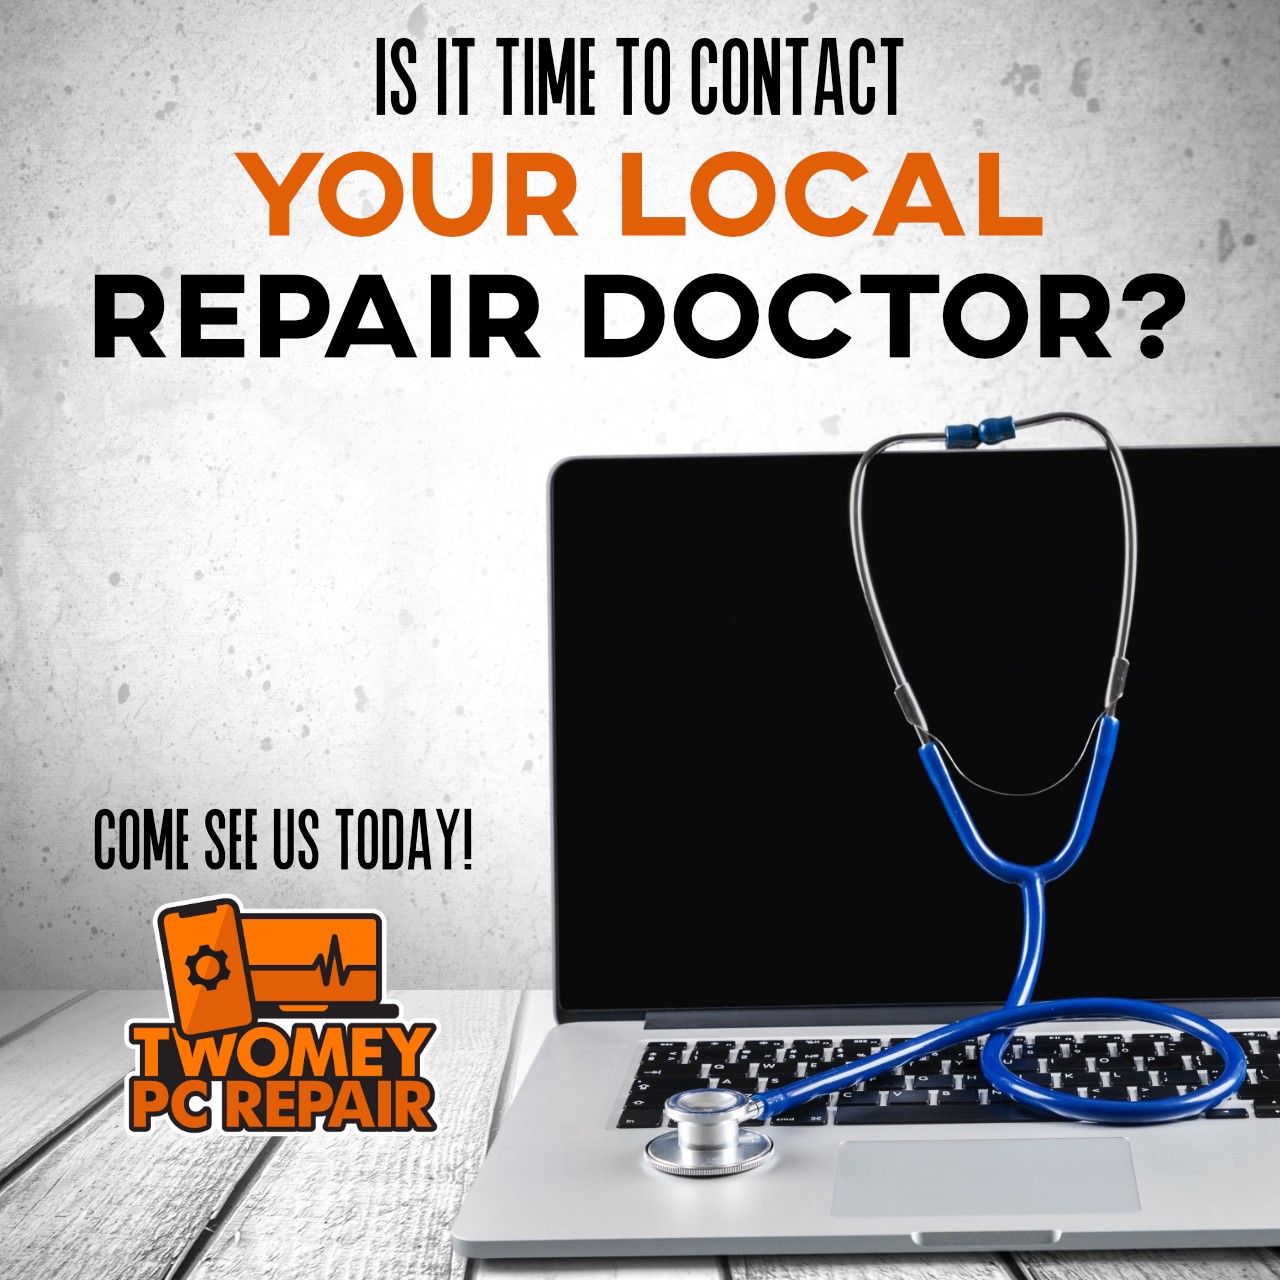 A laptop with a stethoscope and the words "is it time to contact your local repair doctor for computer repair?".